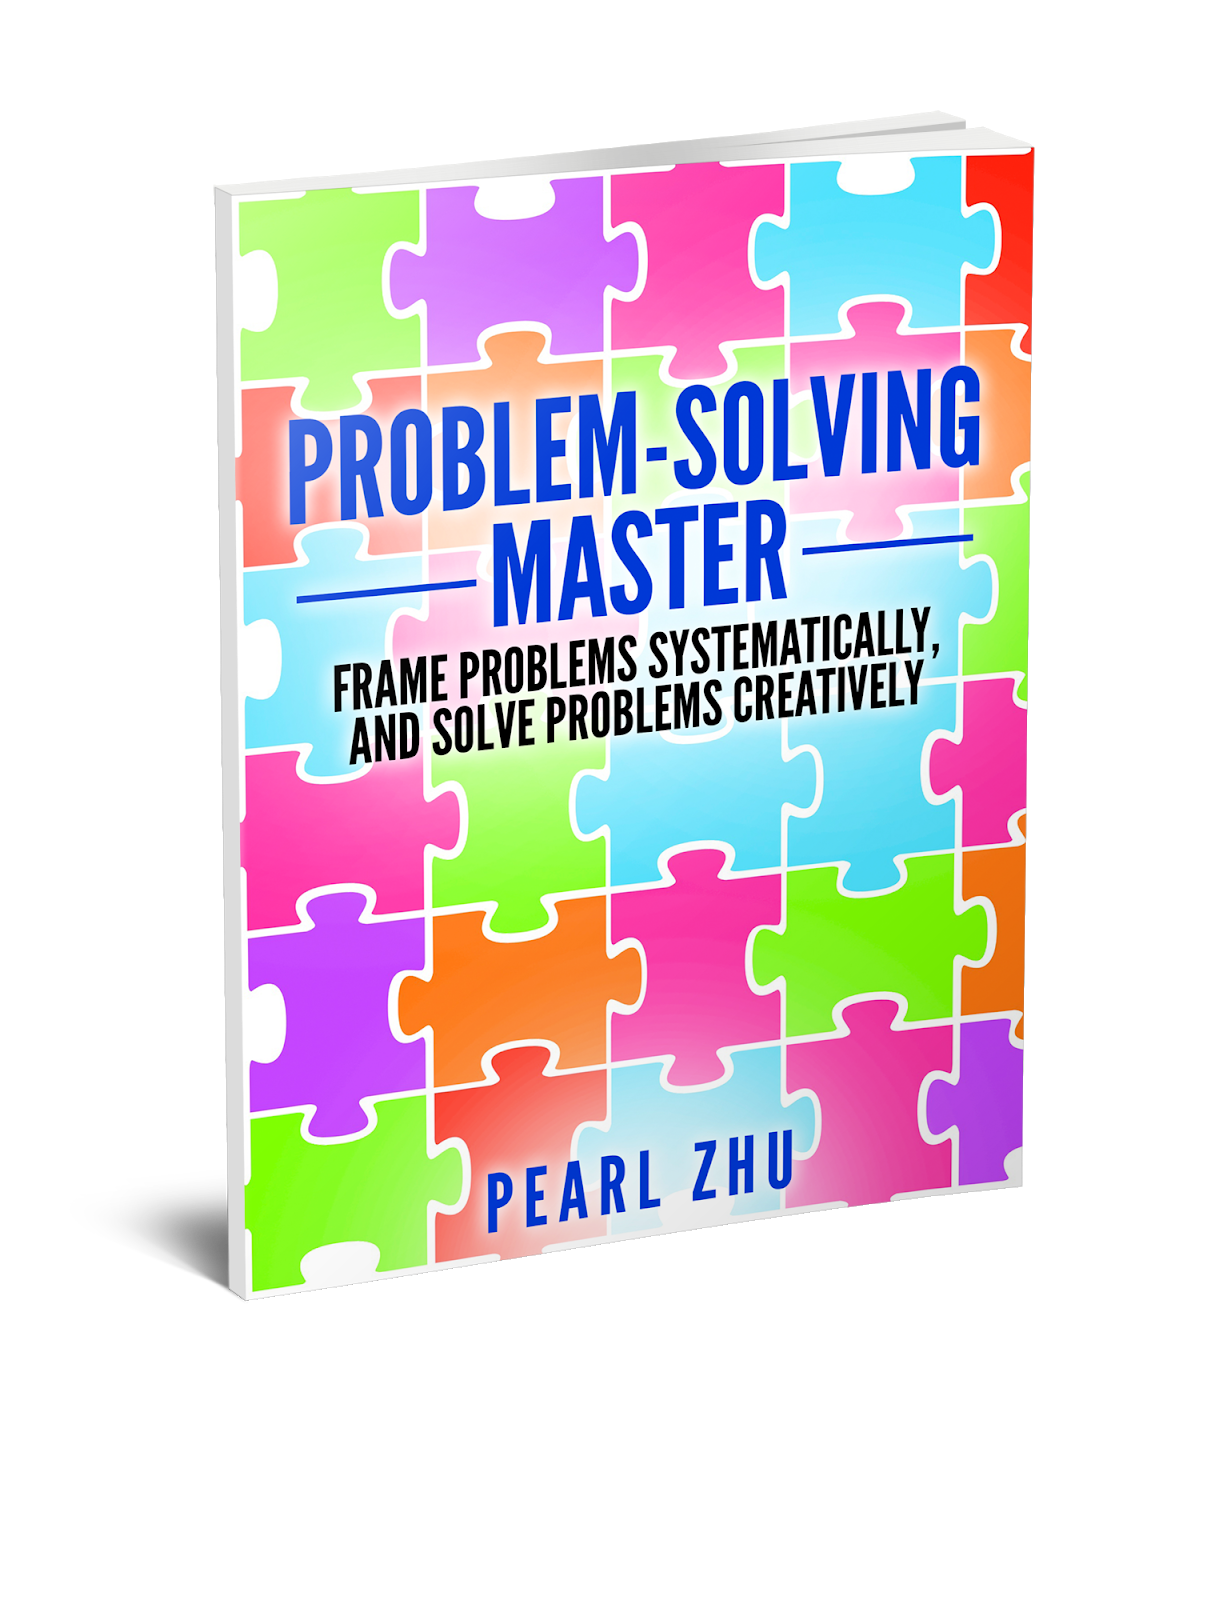 The Problem-Solving Master